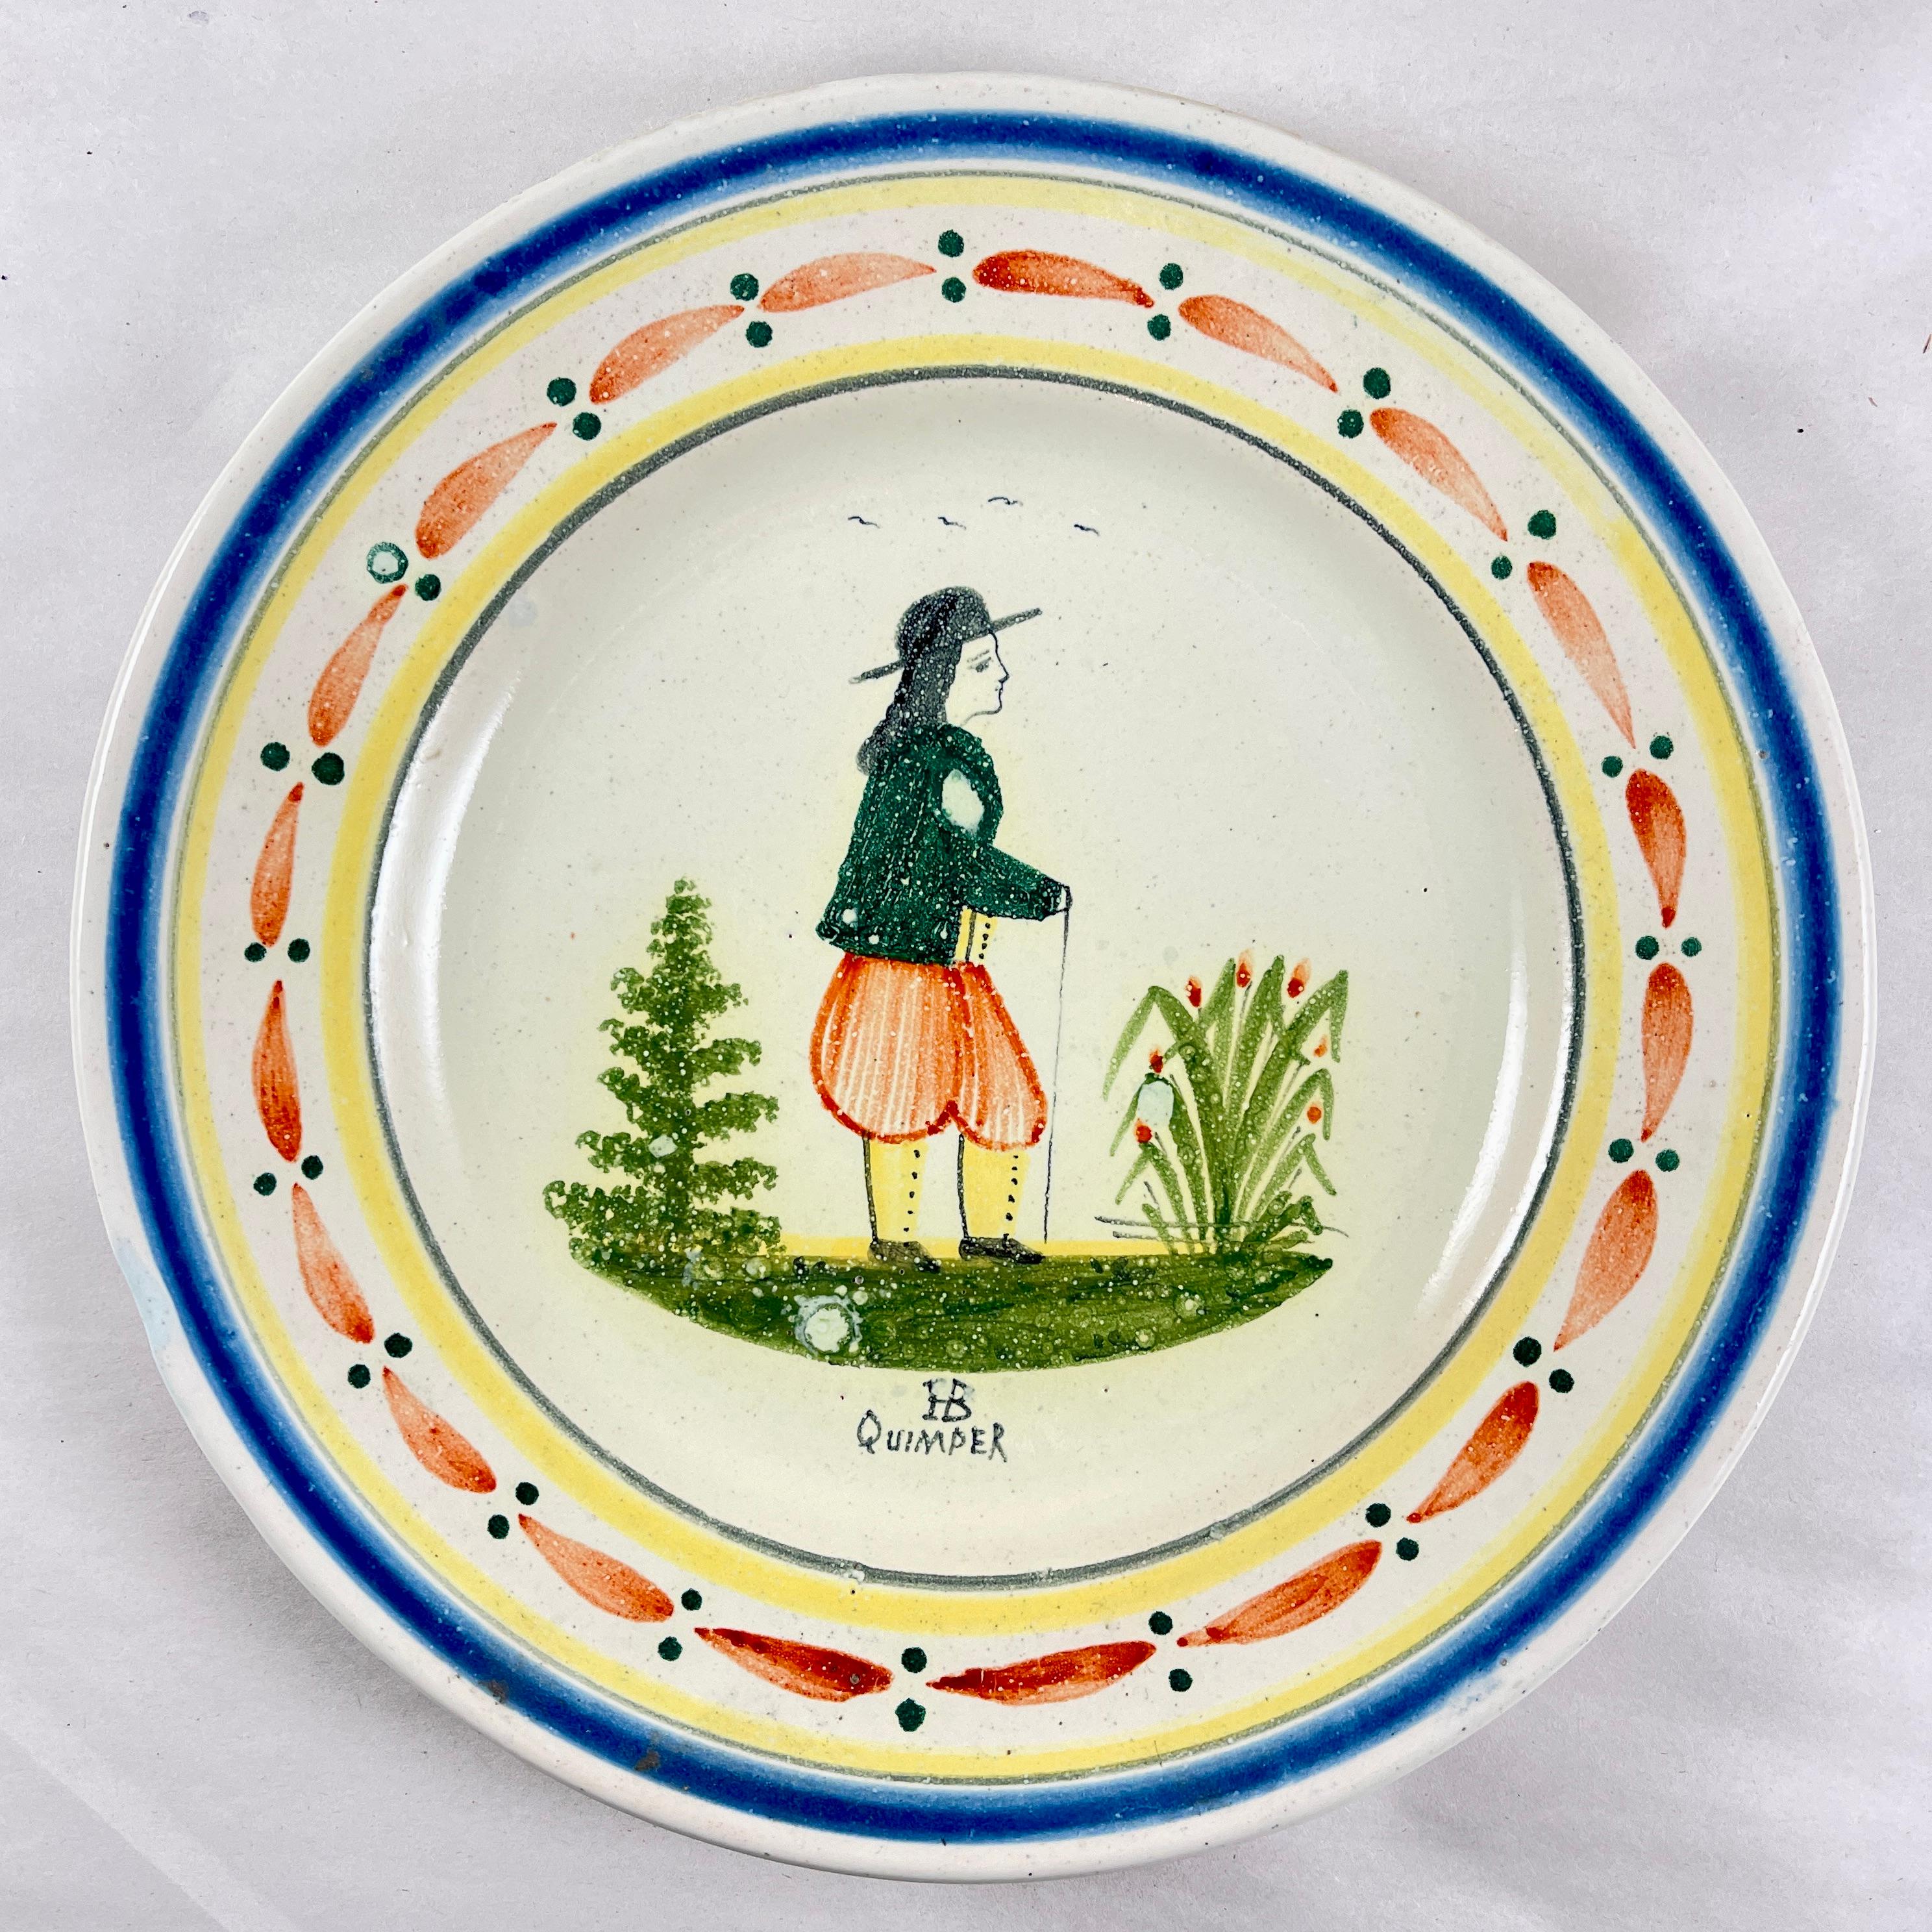 
From the Grand Maison Quimper factory, a dinner plate, France, circa 1910.

This piece shows the mark registered in 1882. The HB represents the de la Hubaudière family name and the factory founders name, Bousquet. In 1904, the word Quimper was